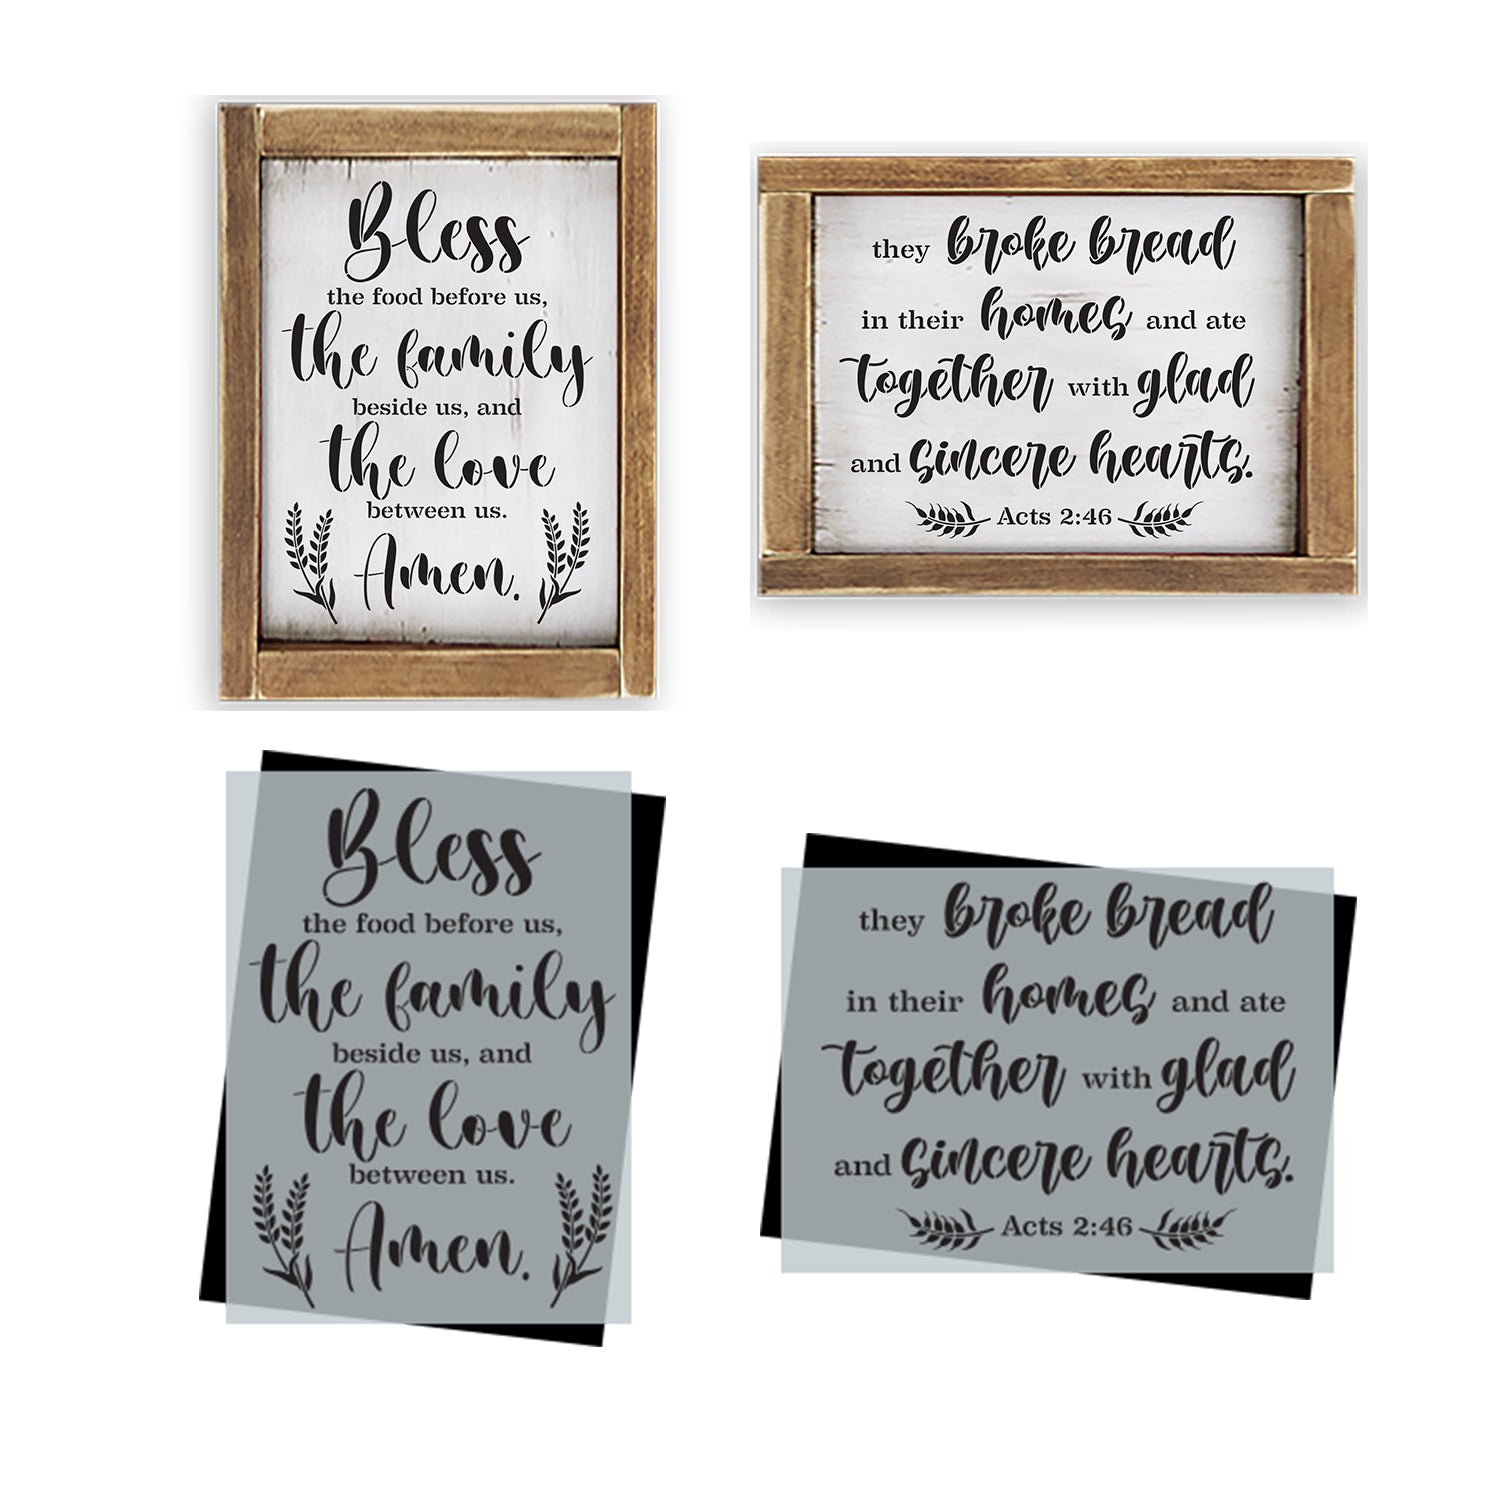 DIY reusable farmhouse scripture stencils, Bless the food before us sign stencil, bless the food before us, the family beside us, and the love between us amen diy home decor sign stencil, kitchen signs, diy kitchen decor,  they broke bread in their homes and ate together with glad and sincere hearts acts 2:46 kitchen sign stencil, christian home signs stencils